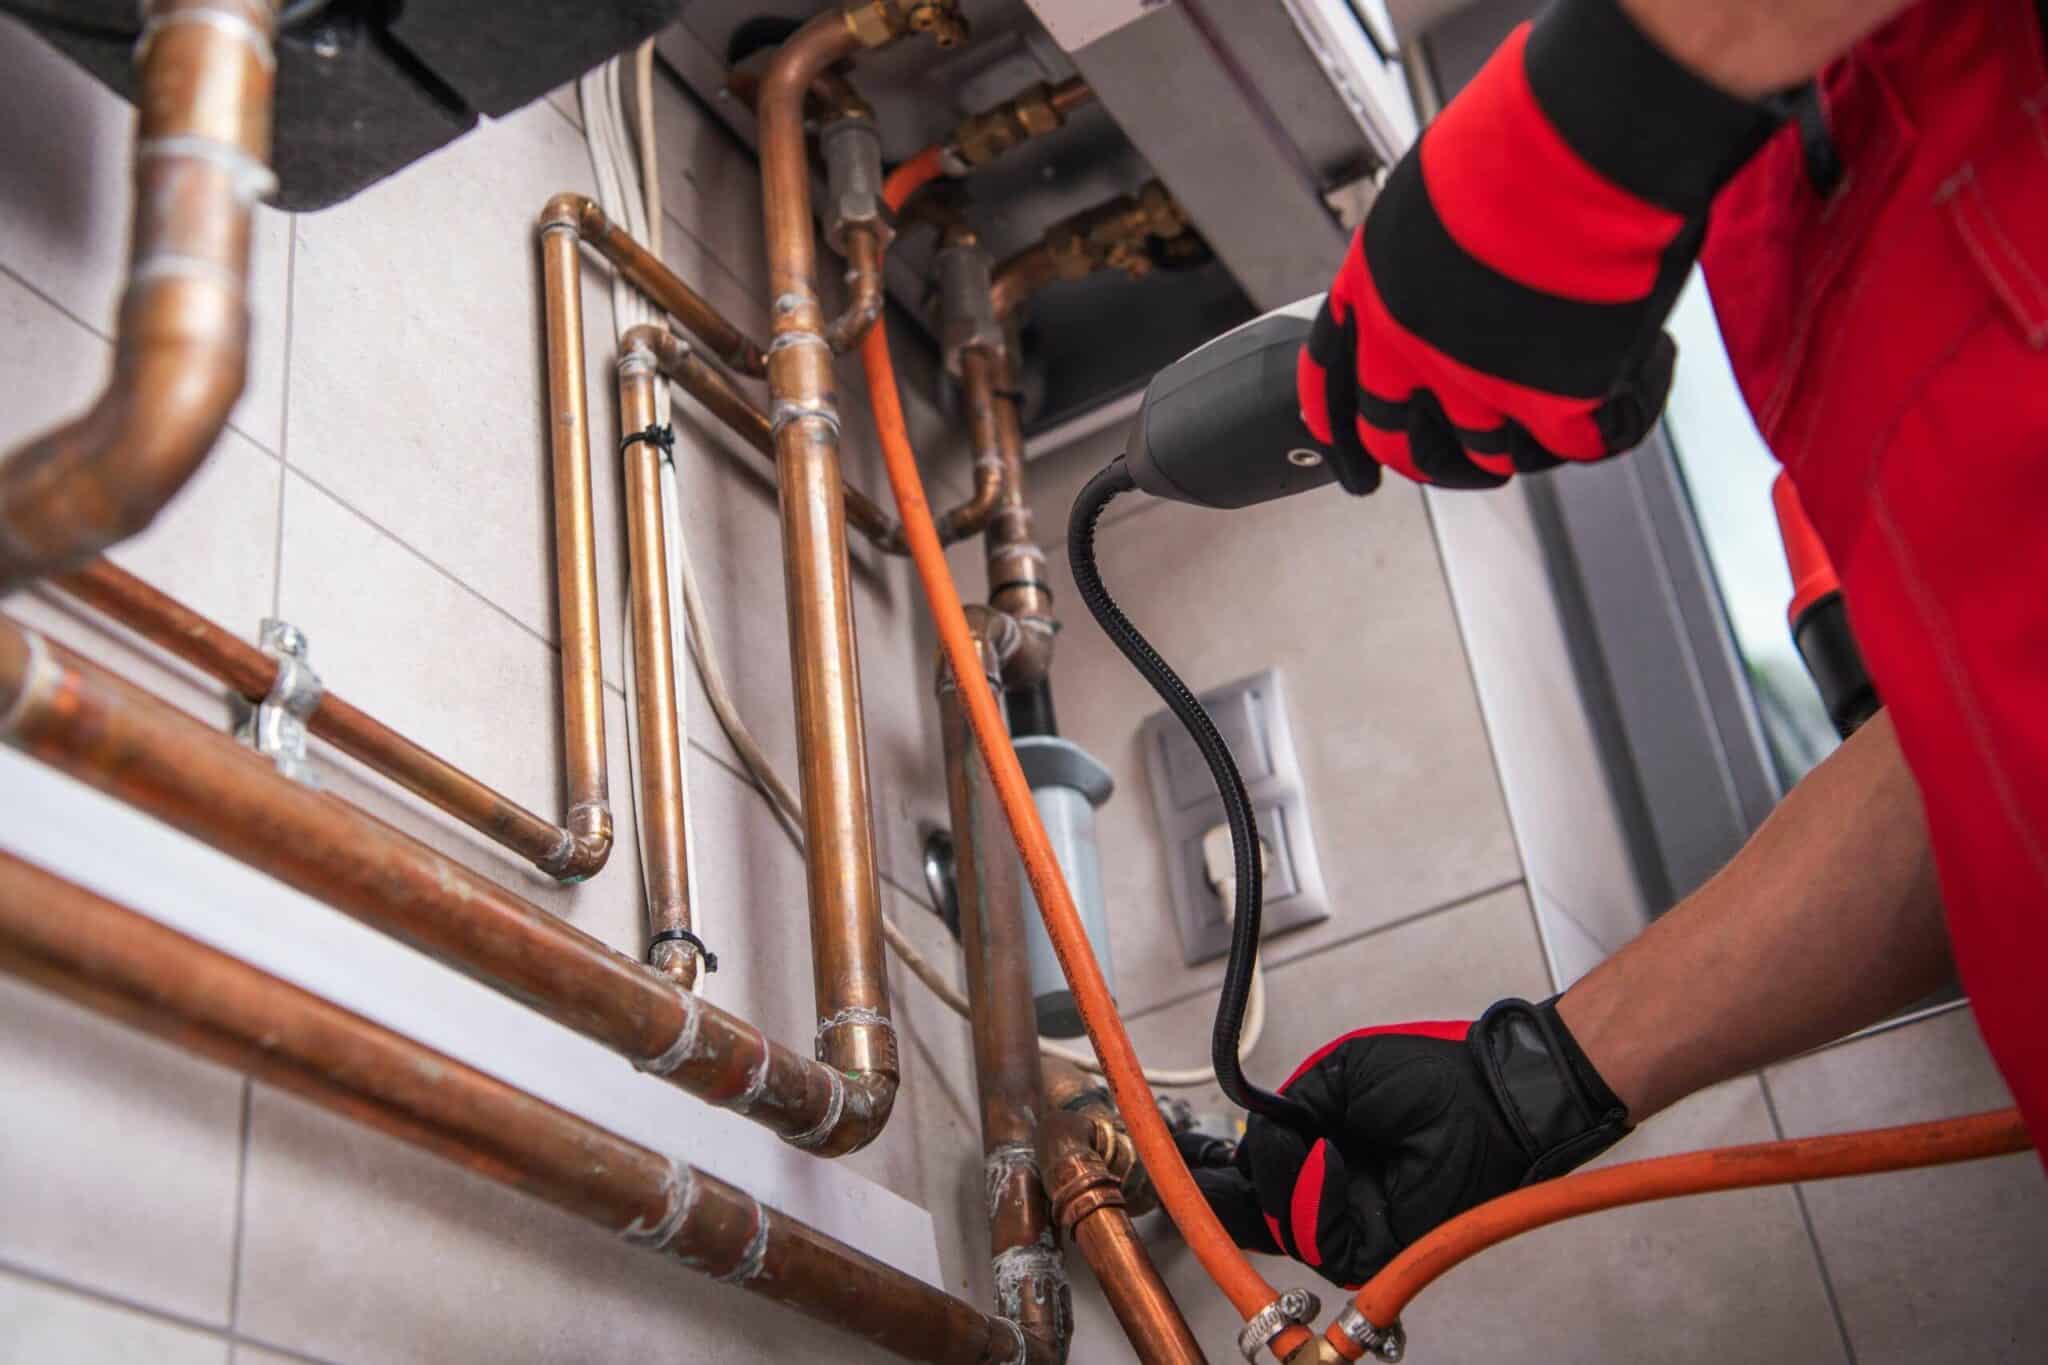 Know What to Do With a Gas Leak in Your Home